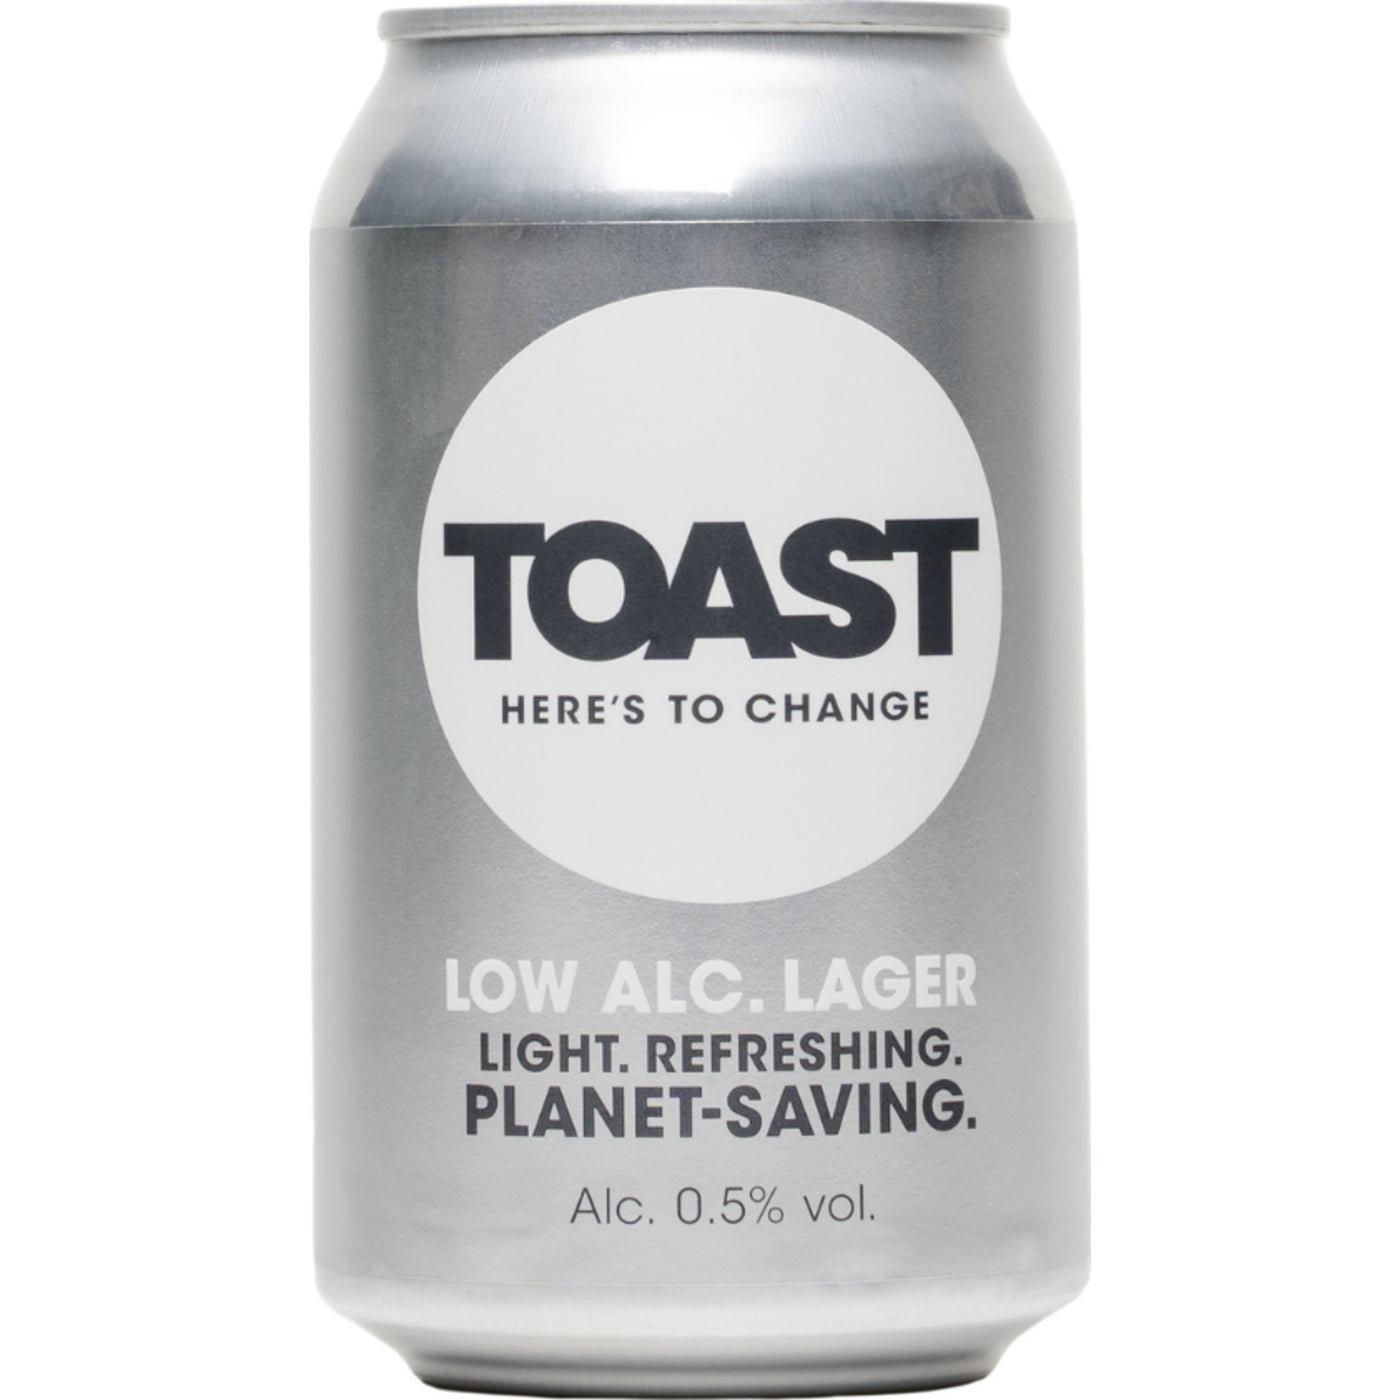 Toast Low Alc Lager